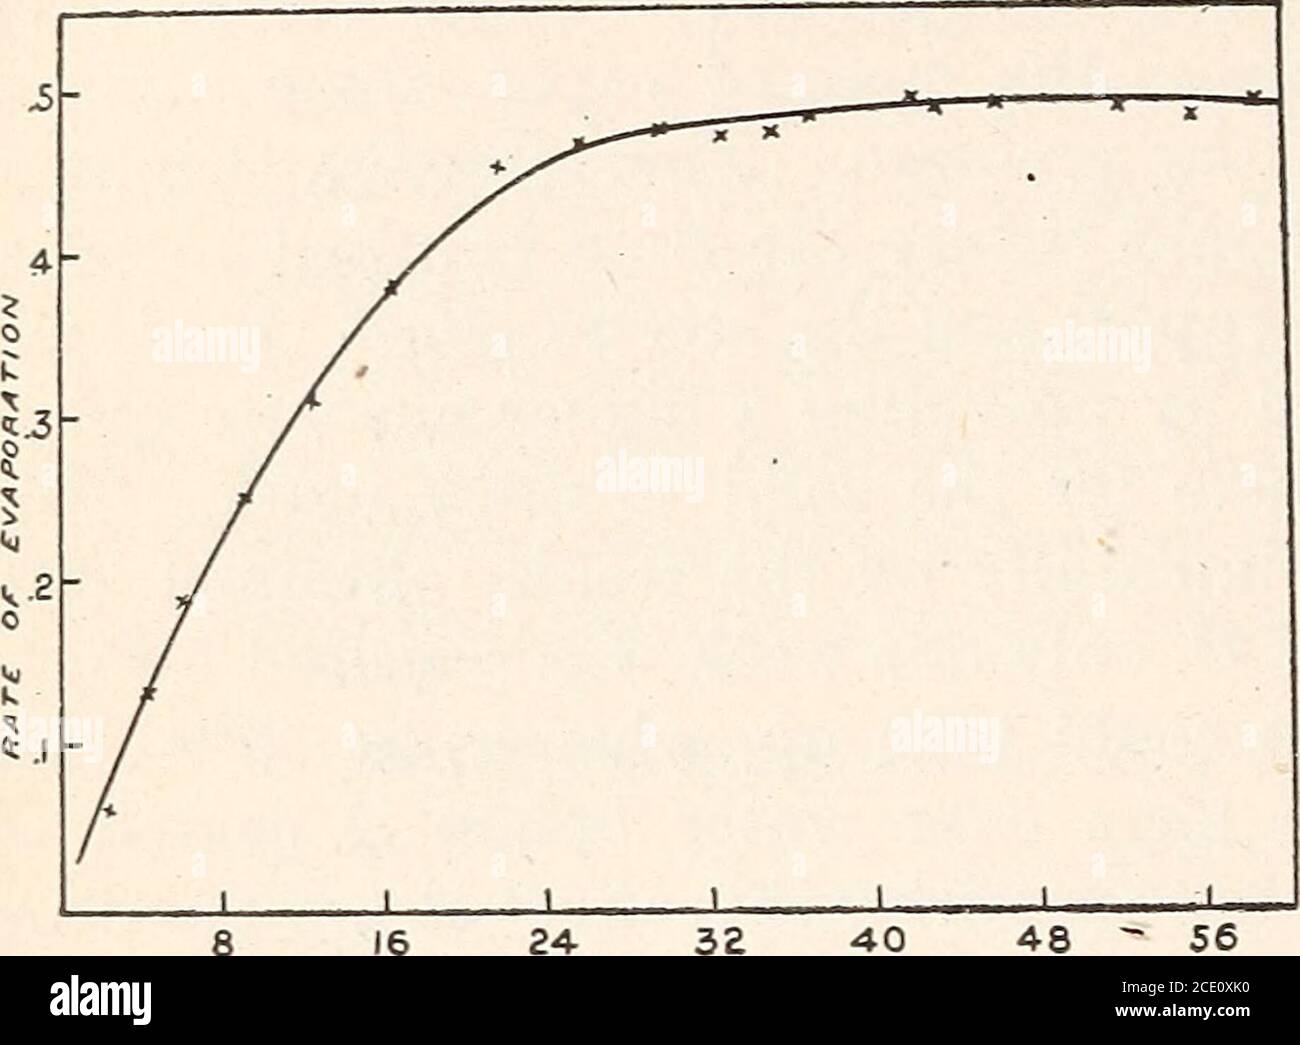 Absorption of vapors and gases by soils . Fig. 16.—Curve showing